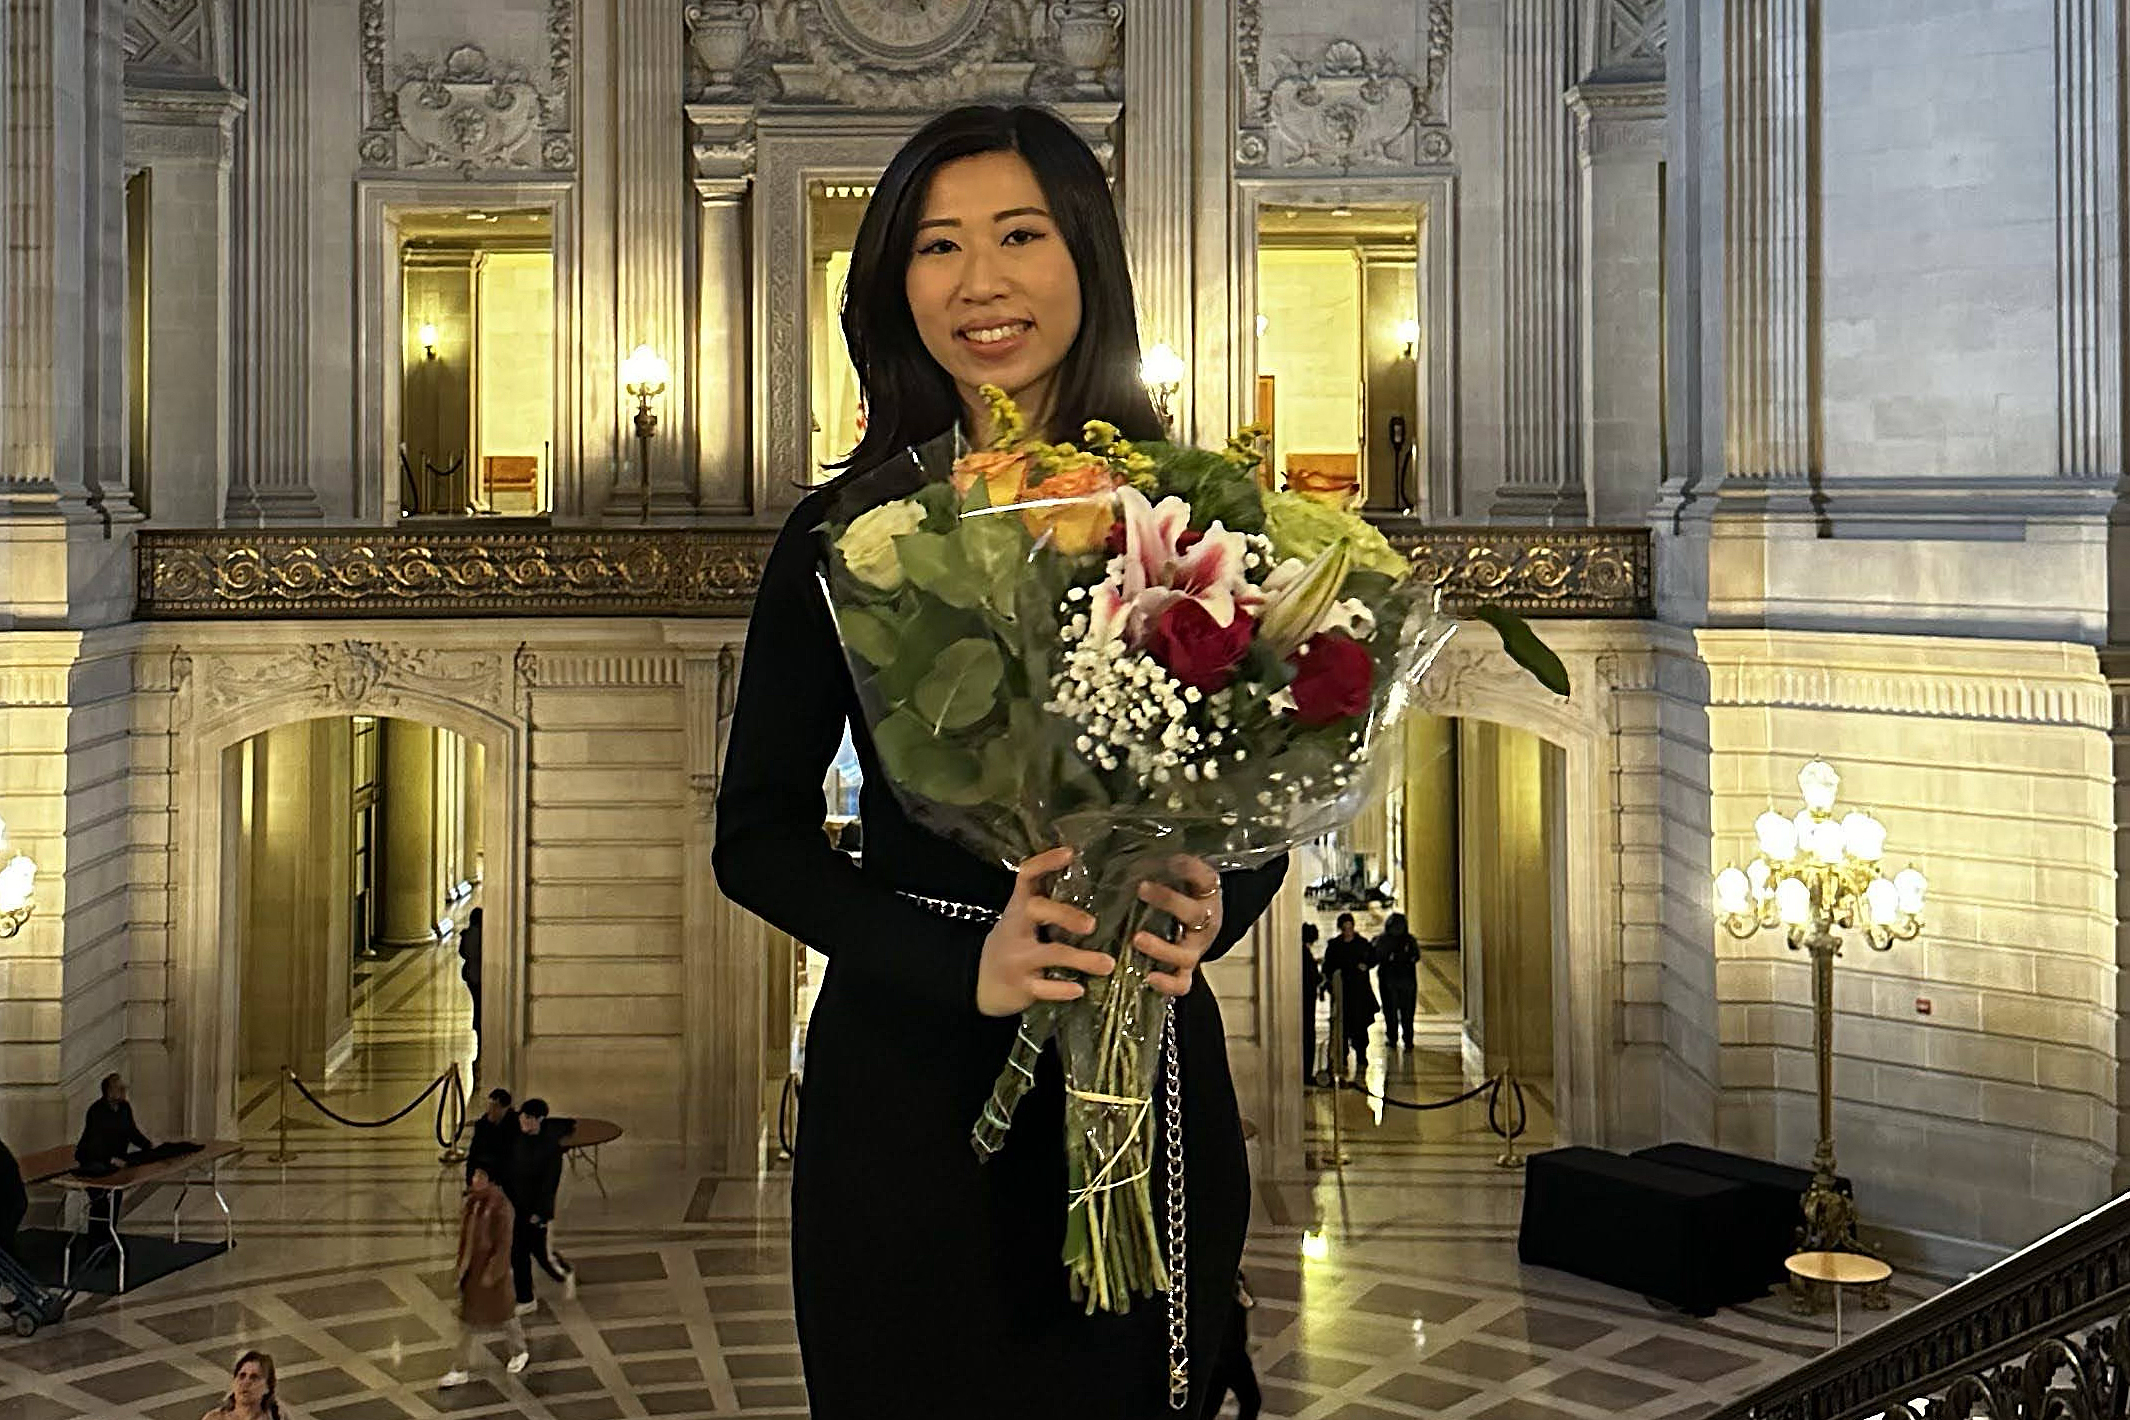 A woman in a black dress holds a bouquet of flowers, standing in an ornate hall with grand lighting.